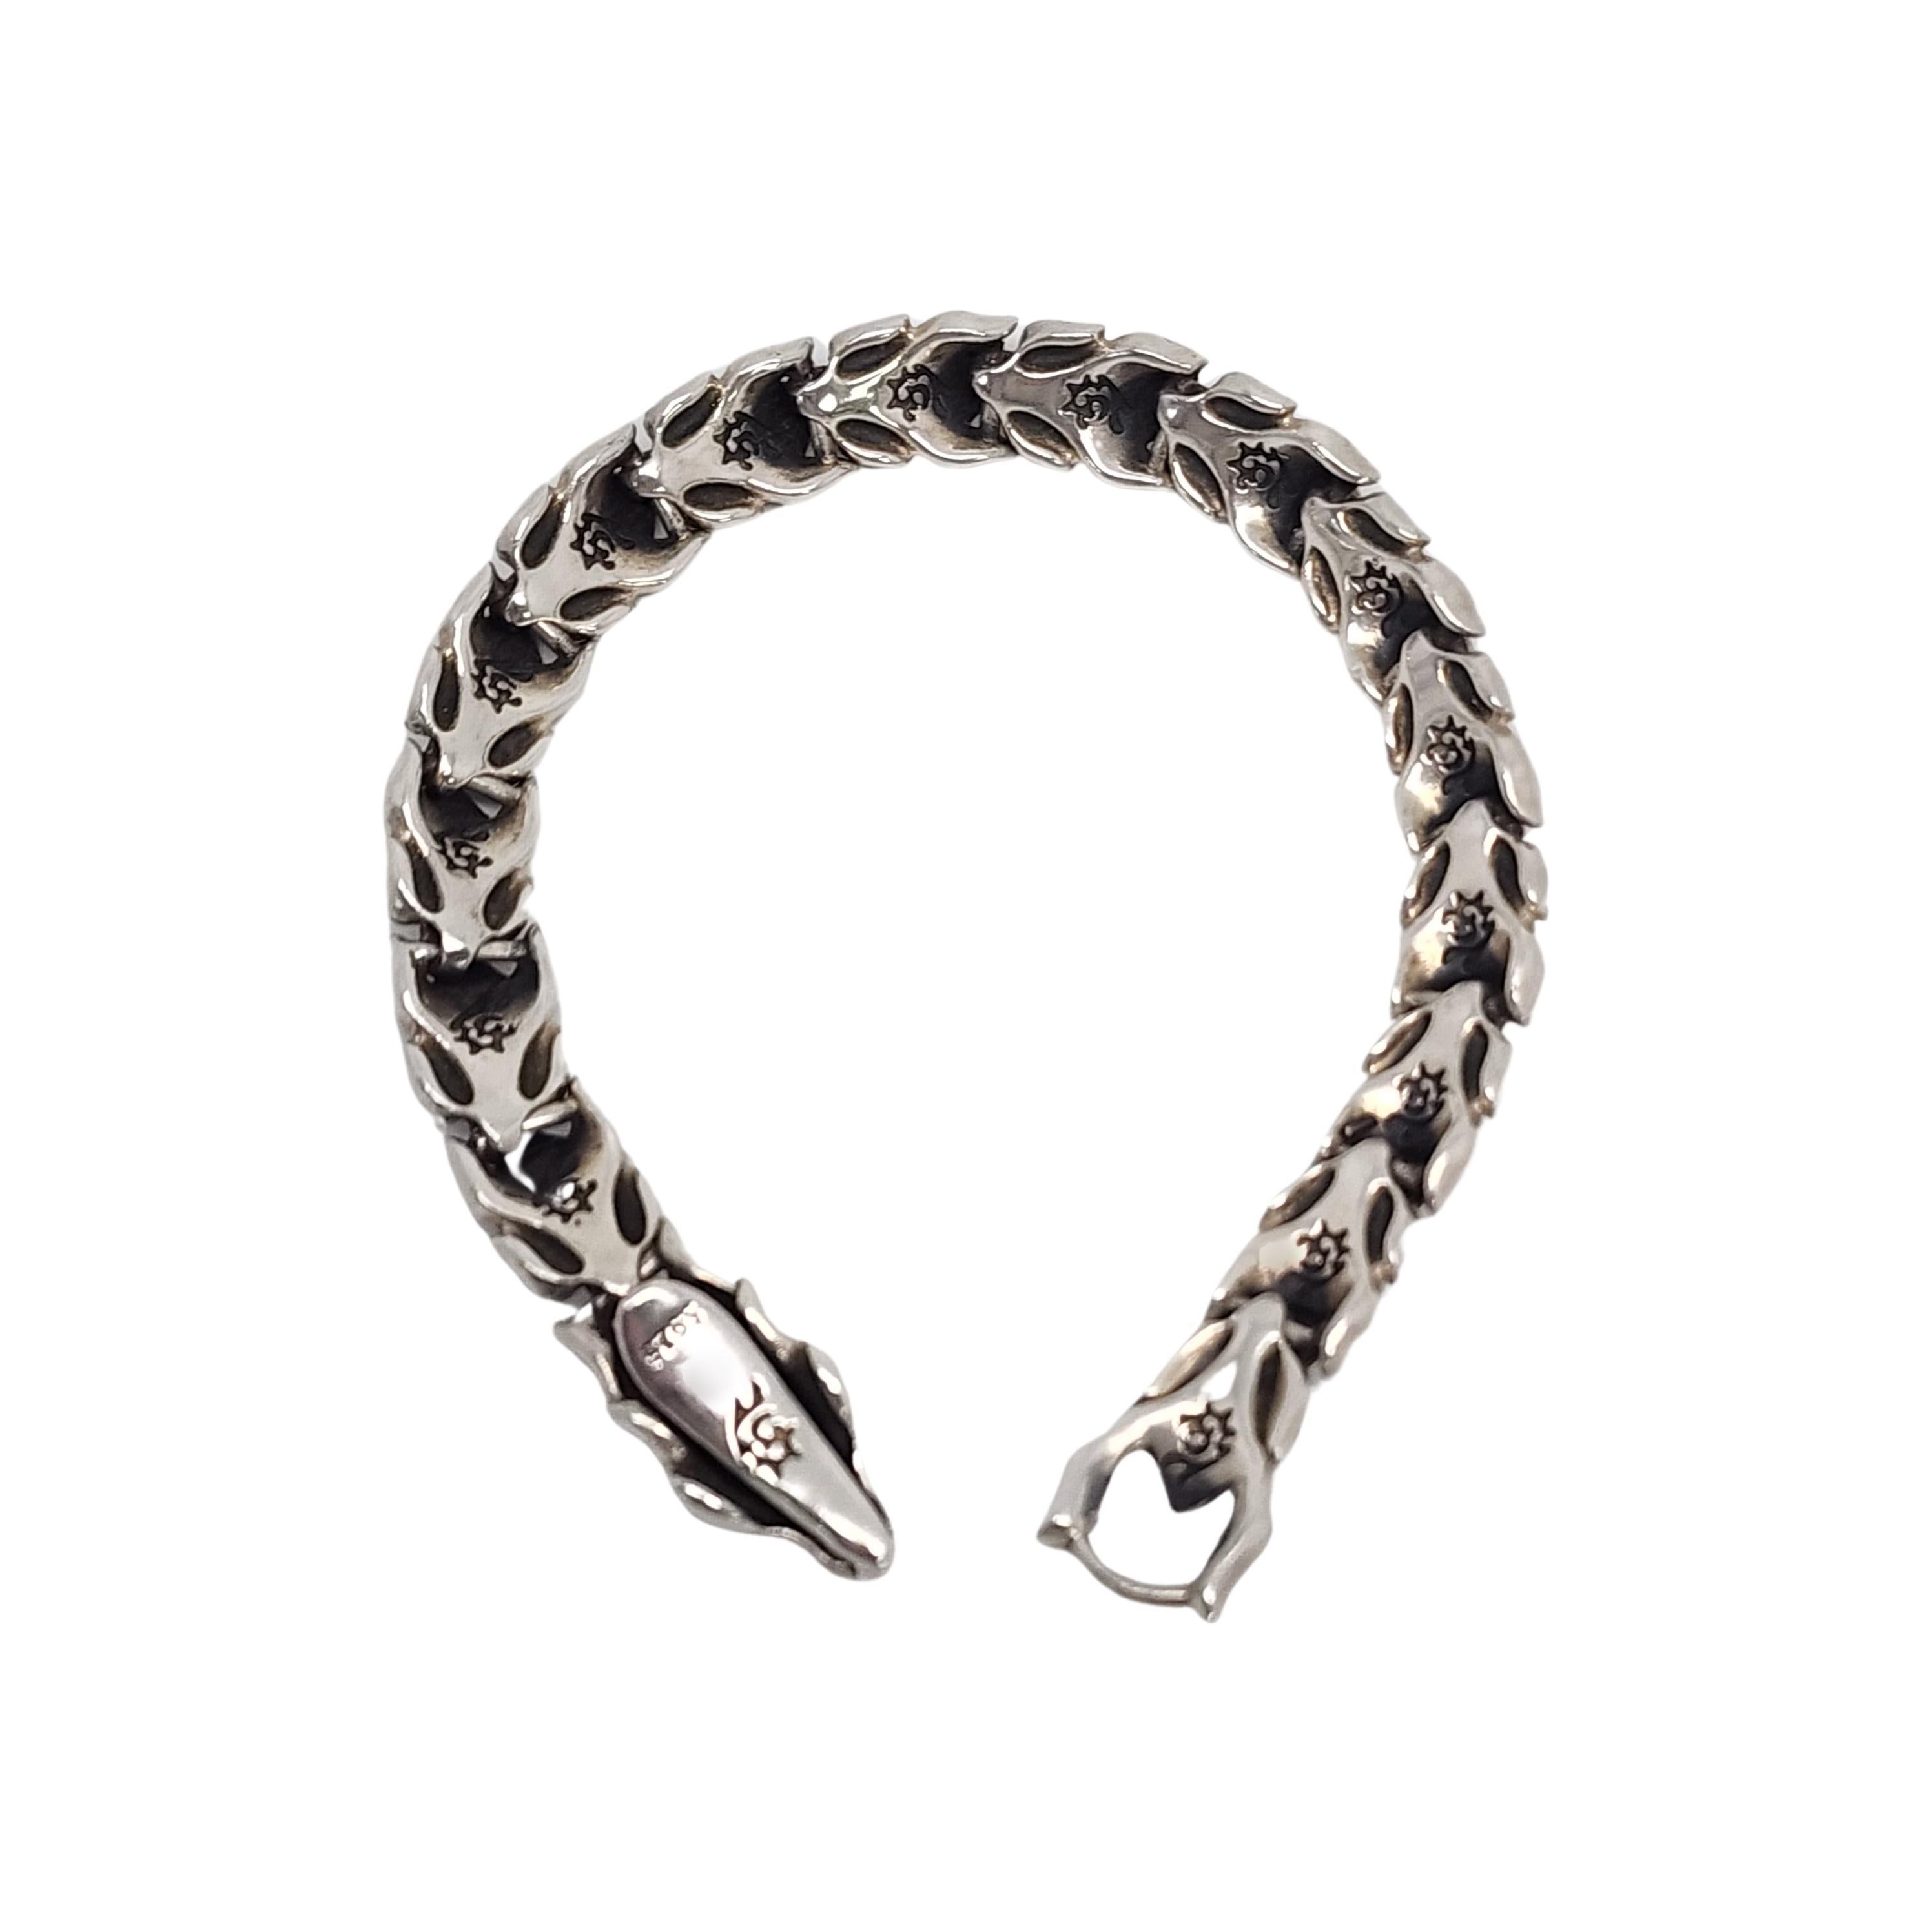 Sterling silver Dragon Scale unisex bracelet

Dragon head clasp with scale design bracelet. Squeeze the dragon hear to open the mouth clasp.

Measures approx 9